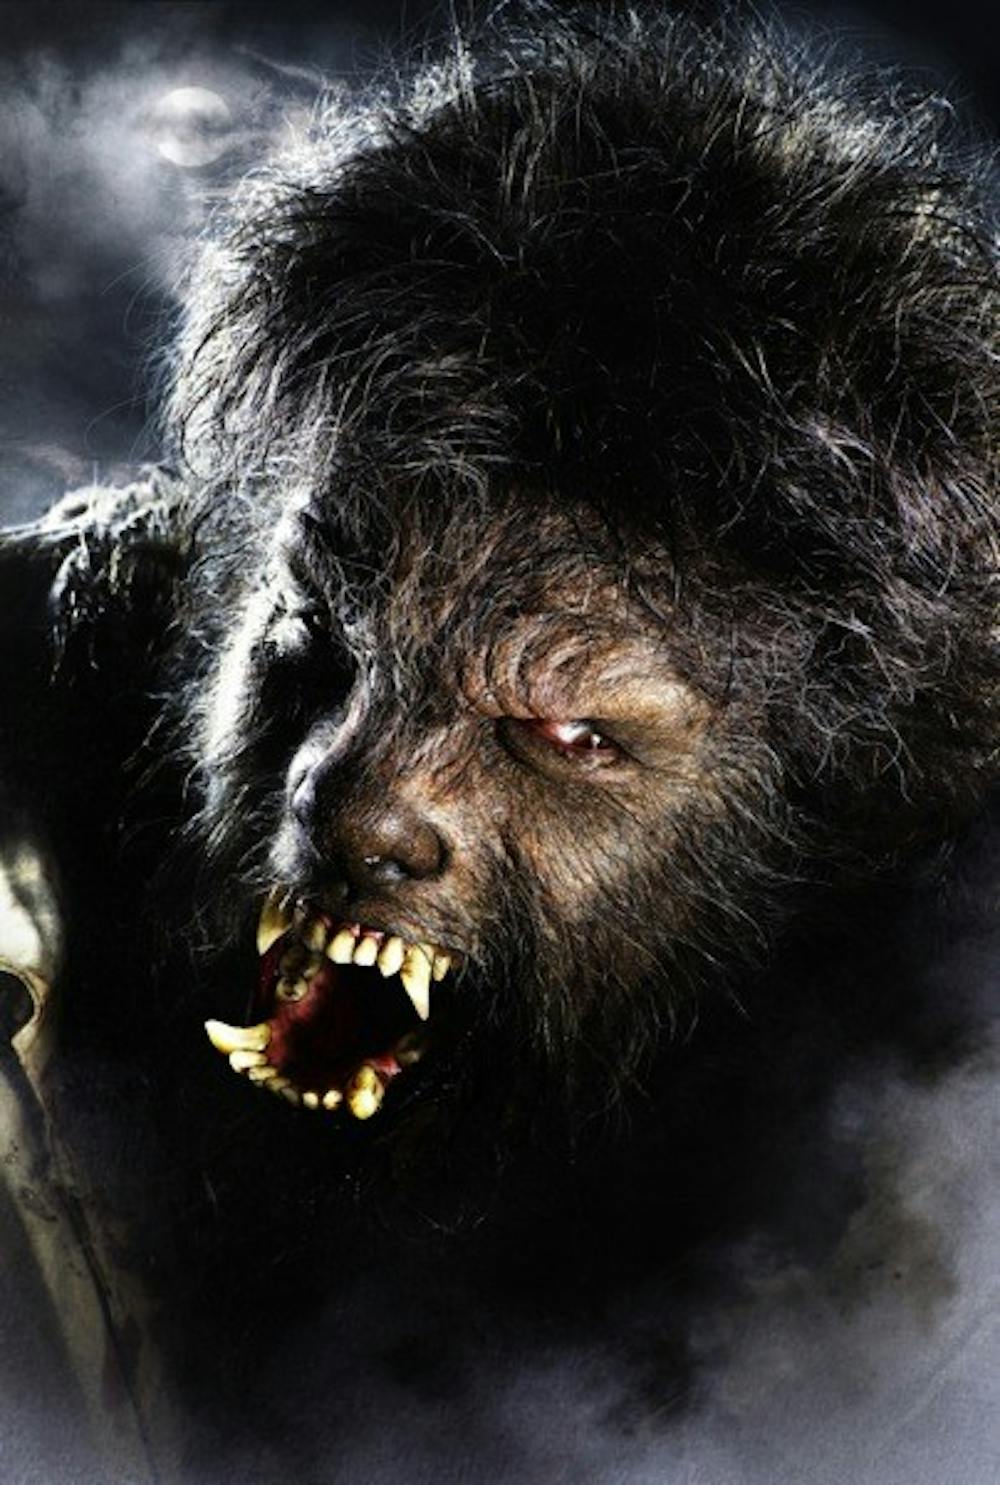 Inspired by the classic Universal film that launched a legacy of horror, ?The Wolfman? brings the myth of a cursed man back to its iconic origins.